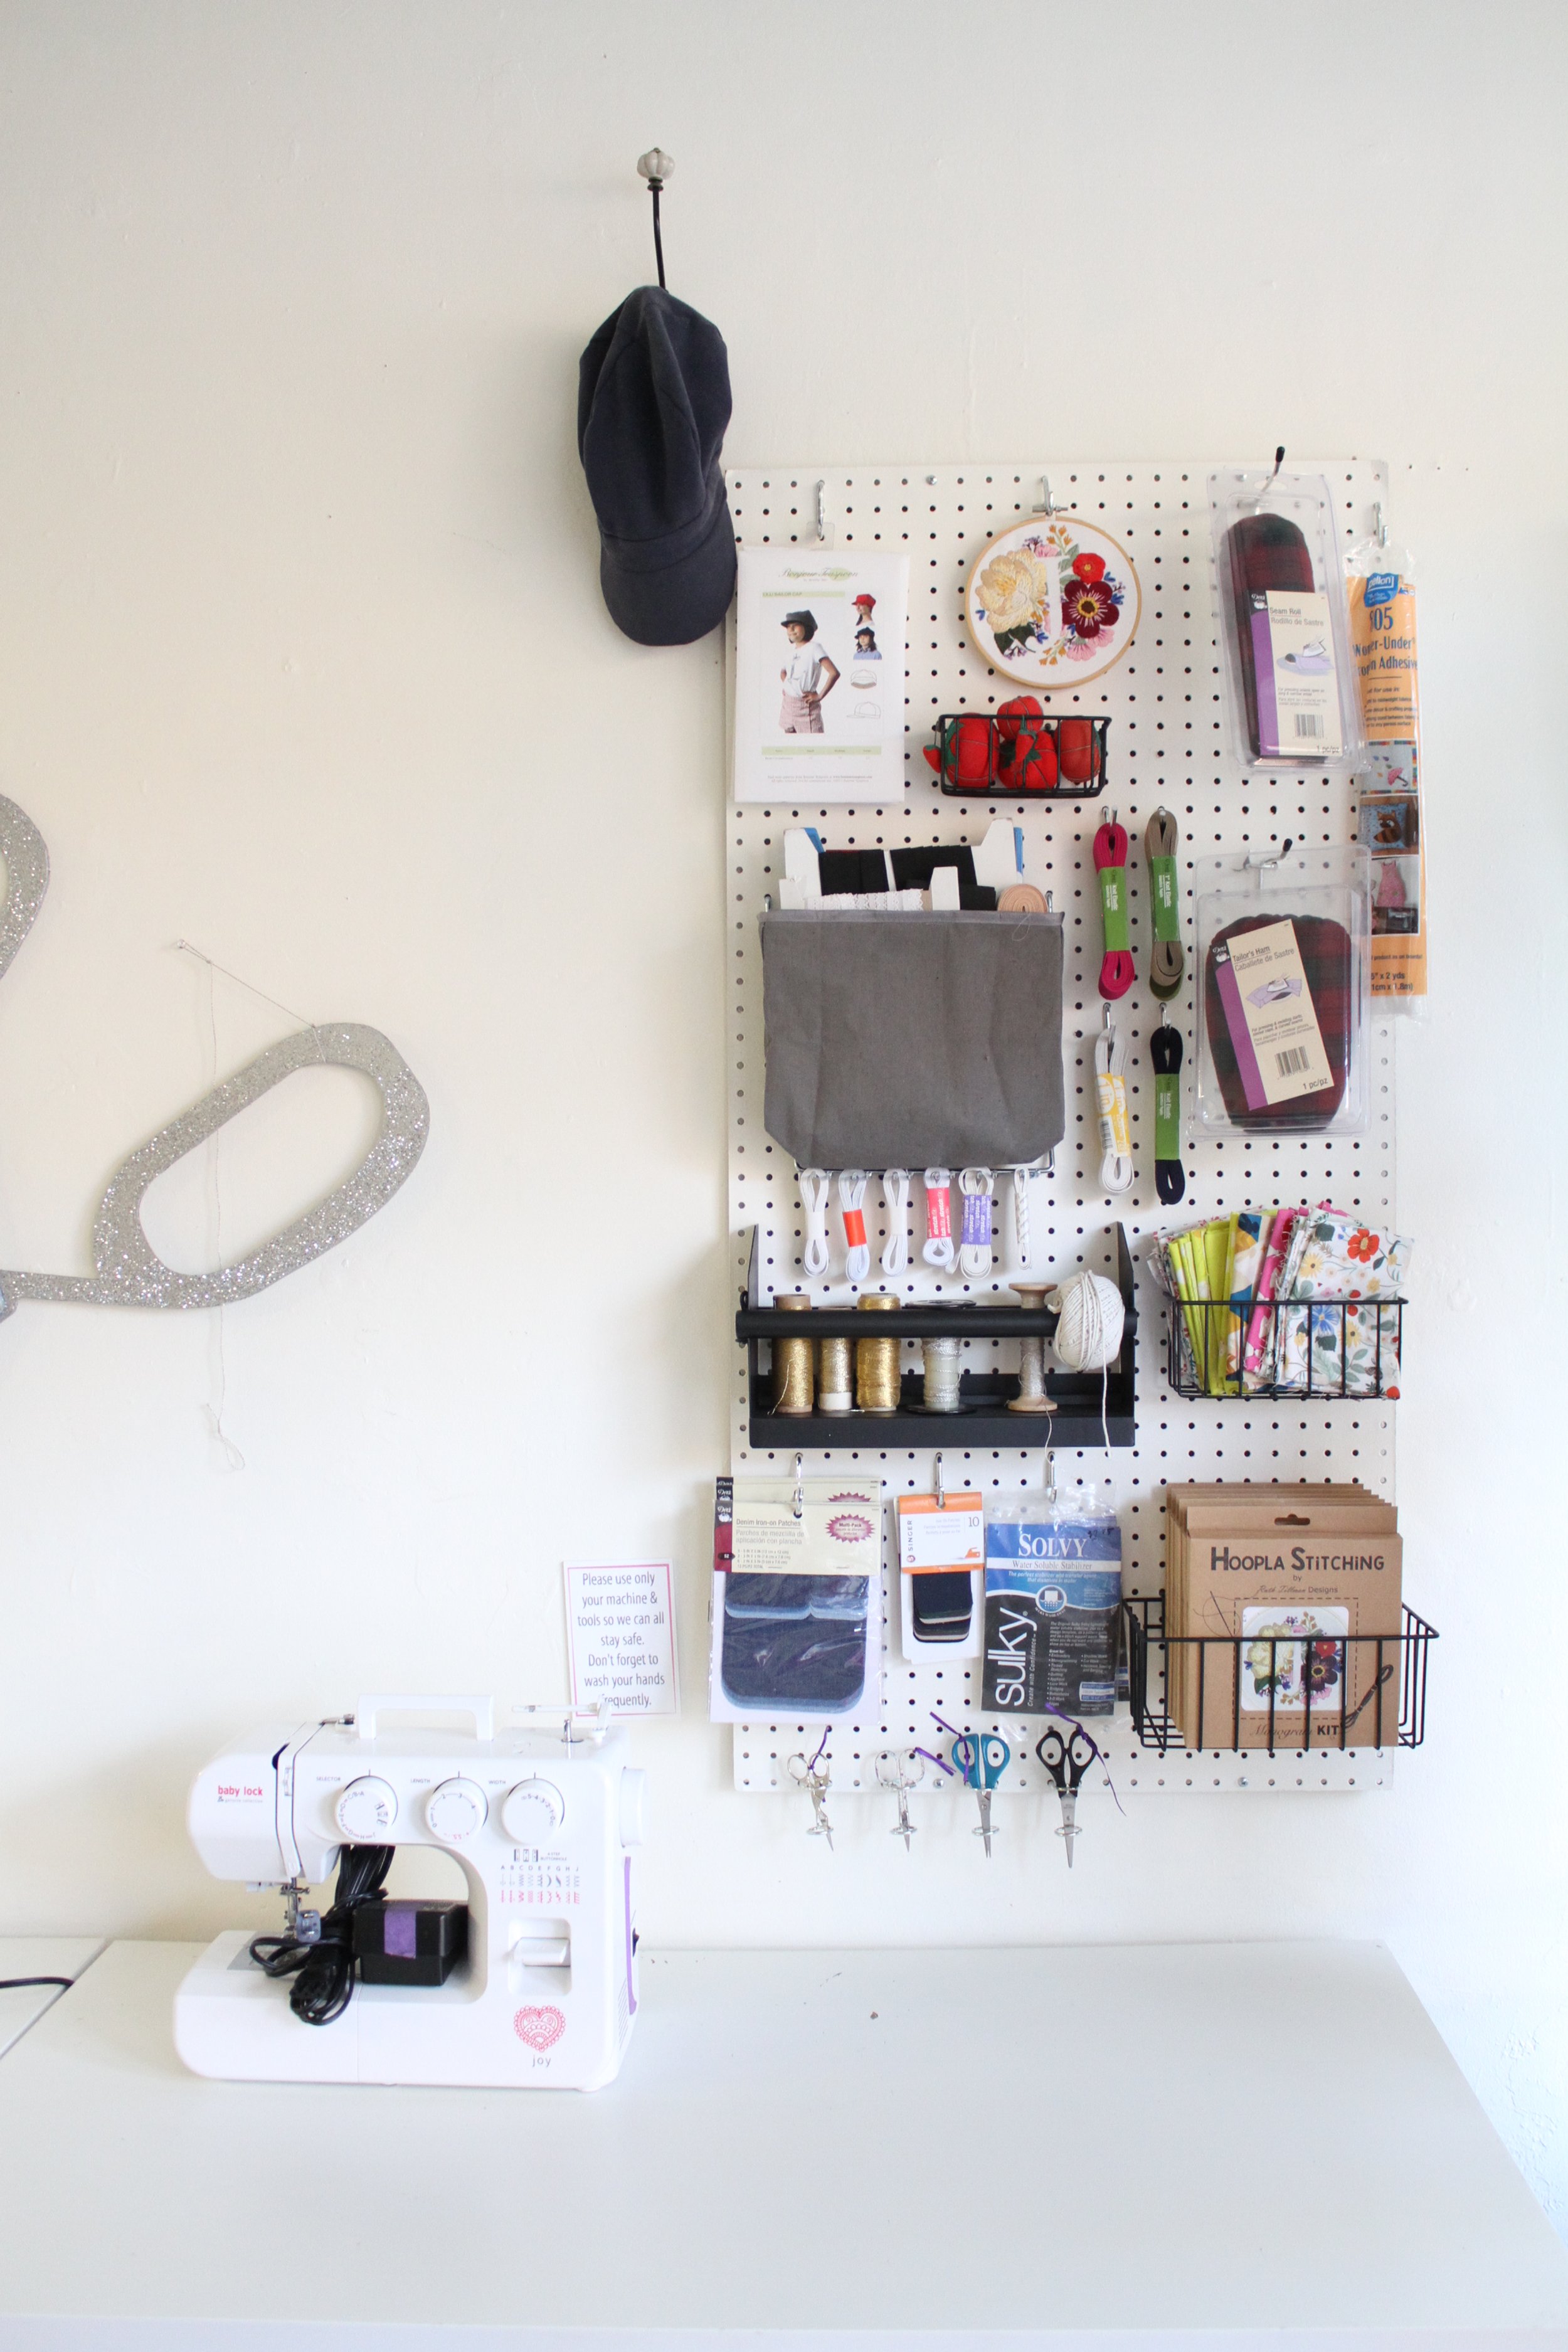 Pegboard Set with Accessories for Craft Room Organizing – MadamSew